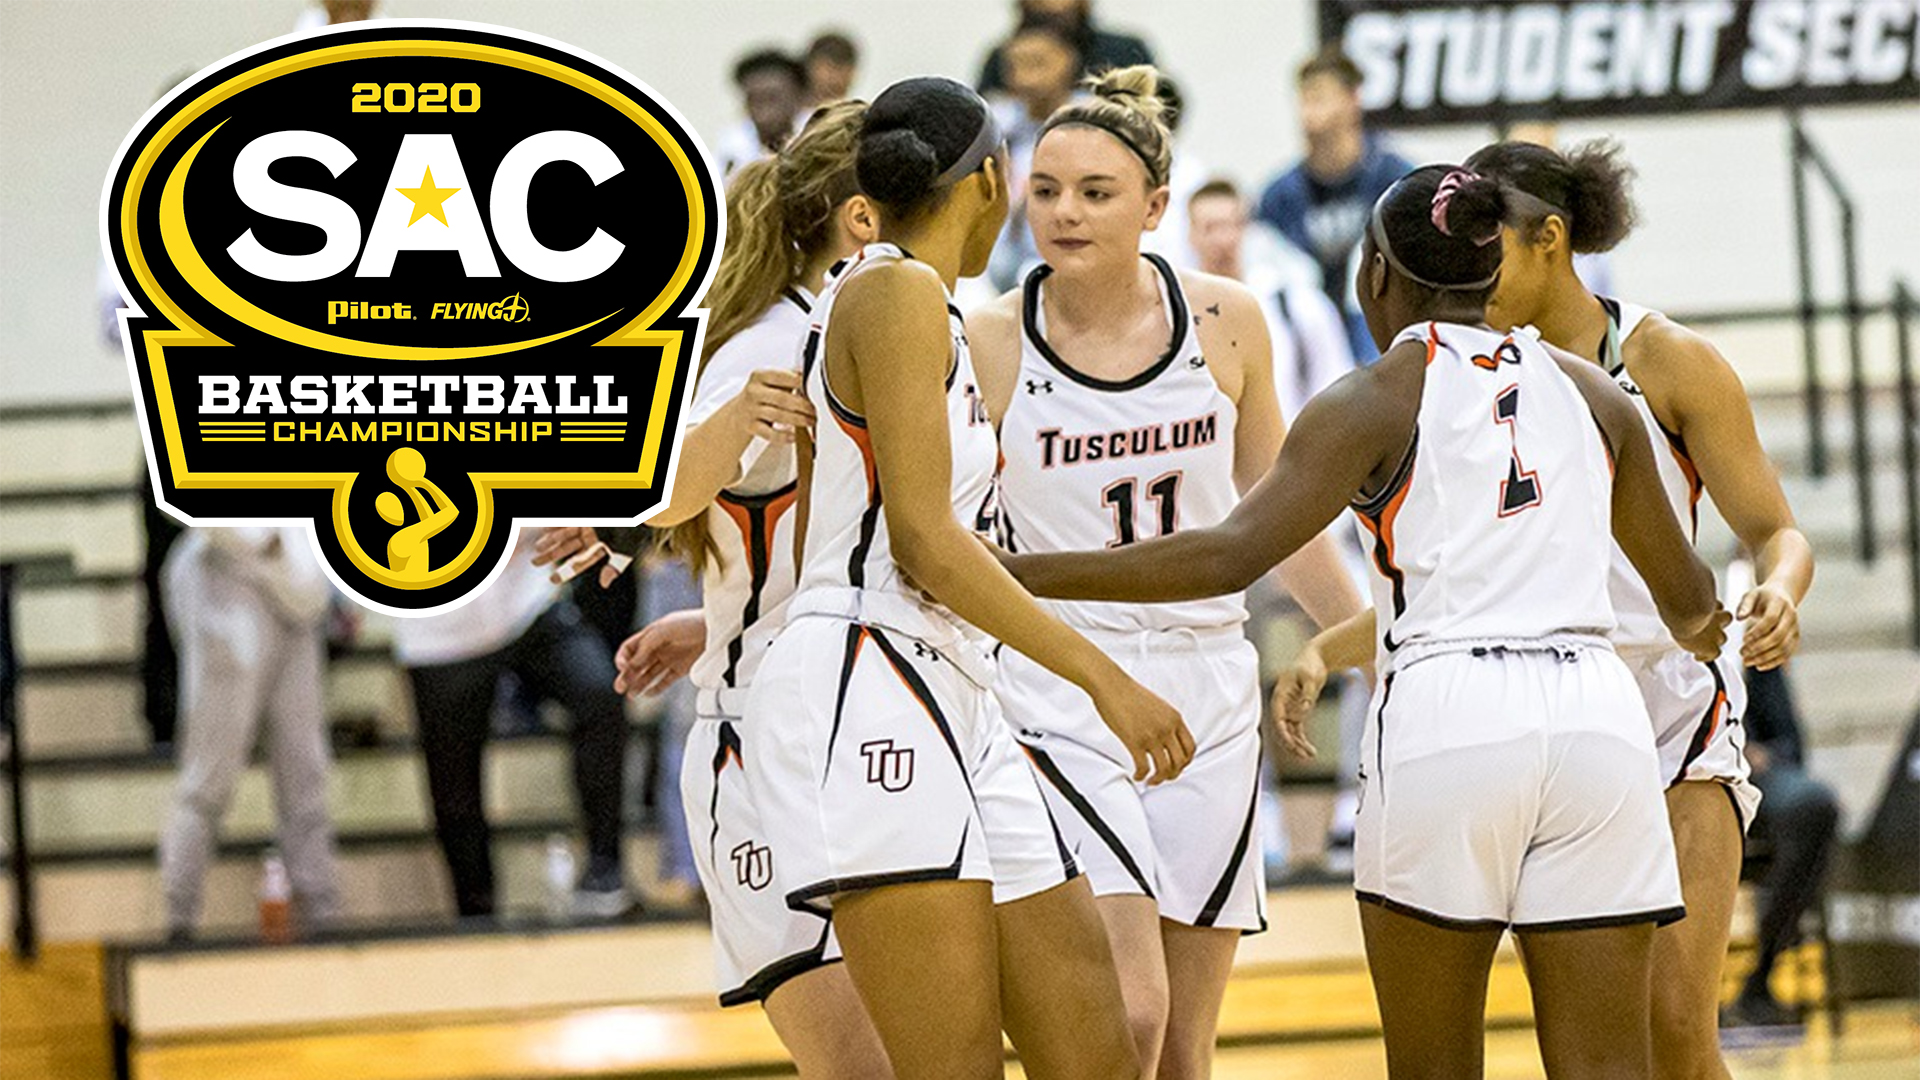 Pioneers to host Wingate in SAC Championship quarterfinals